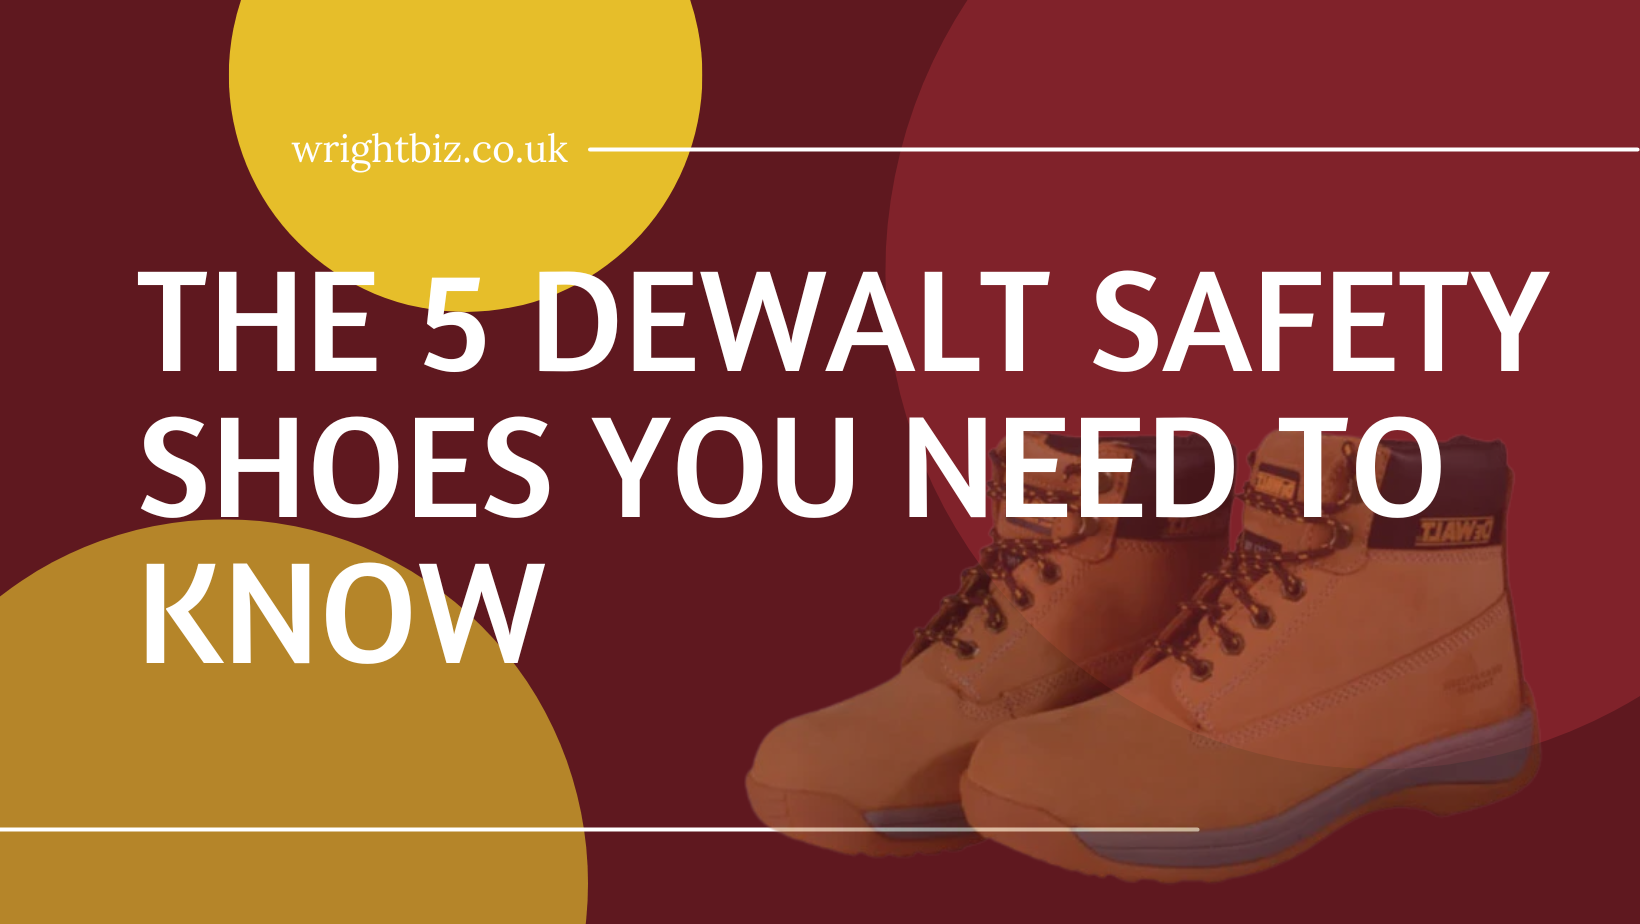 The 5 Dewalt Safety Shoes You Need to Know